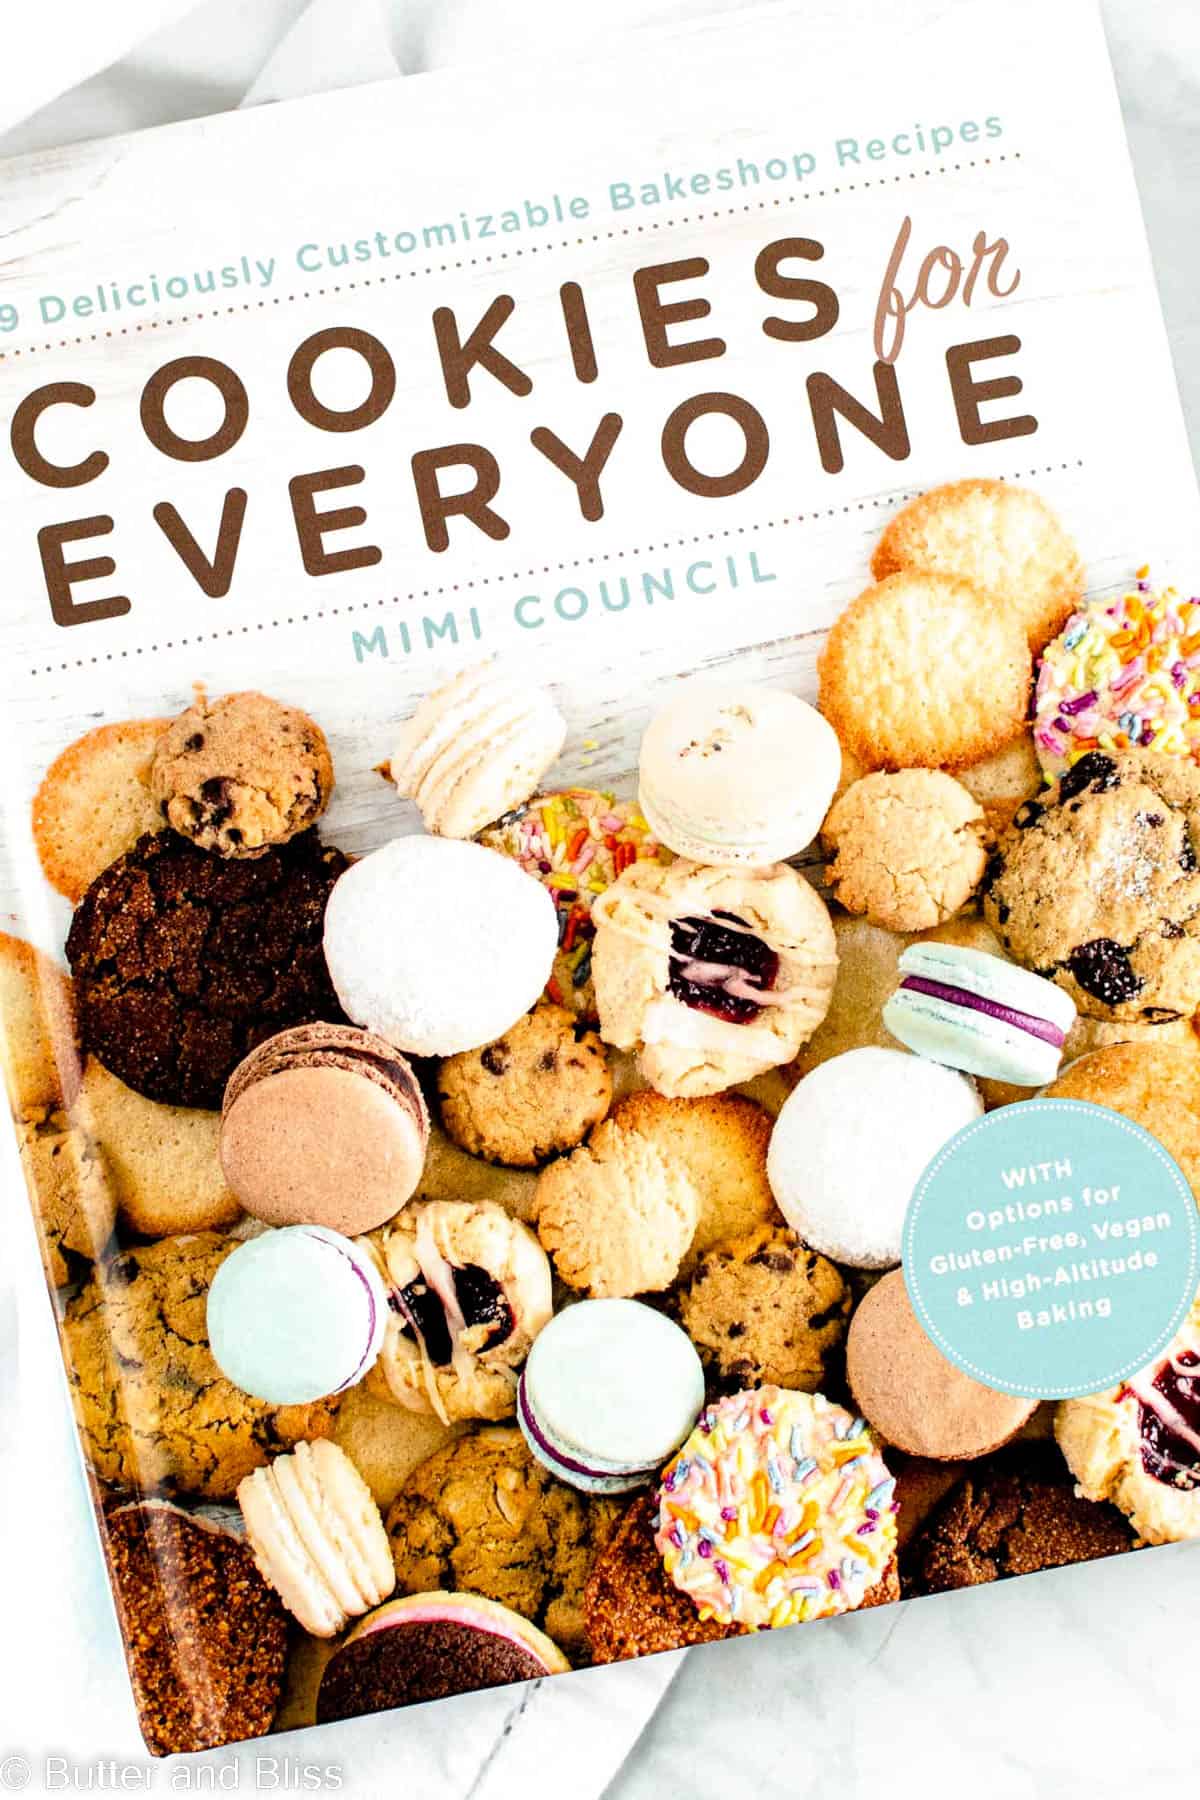 Cookies for Everyone by Mimi Council cookbook set on a table.